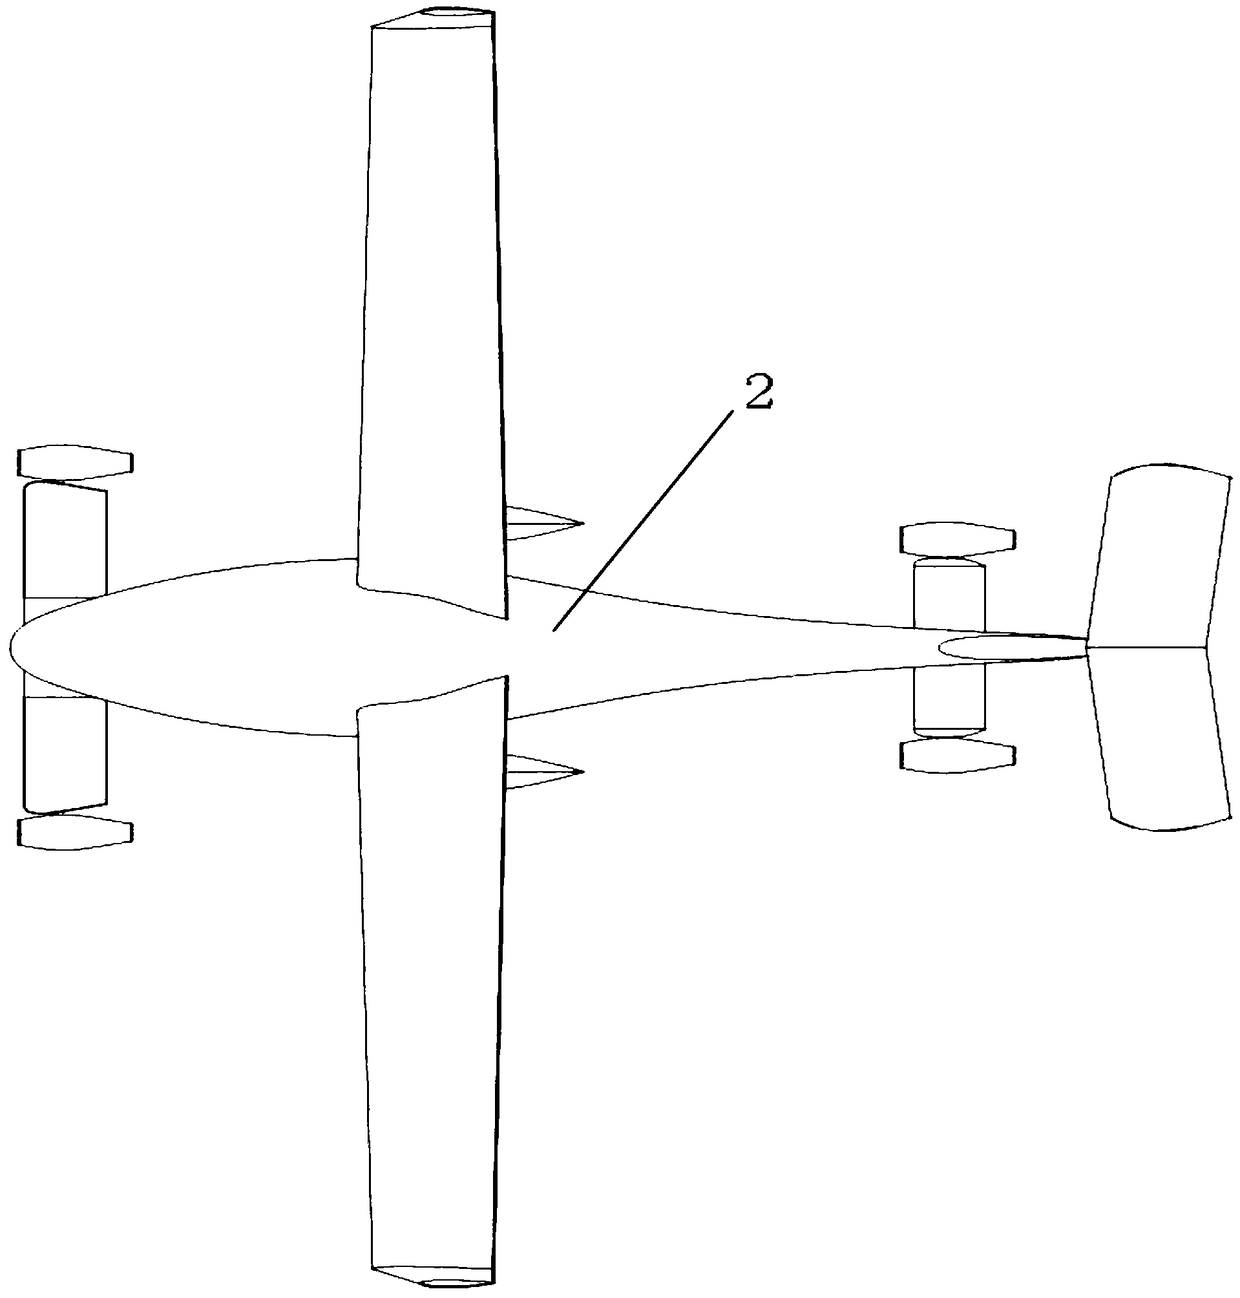 Propulsion system and canard coaxial rotating device of tilting power general-purpose plane